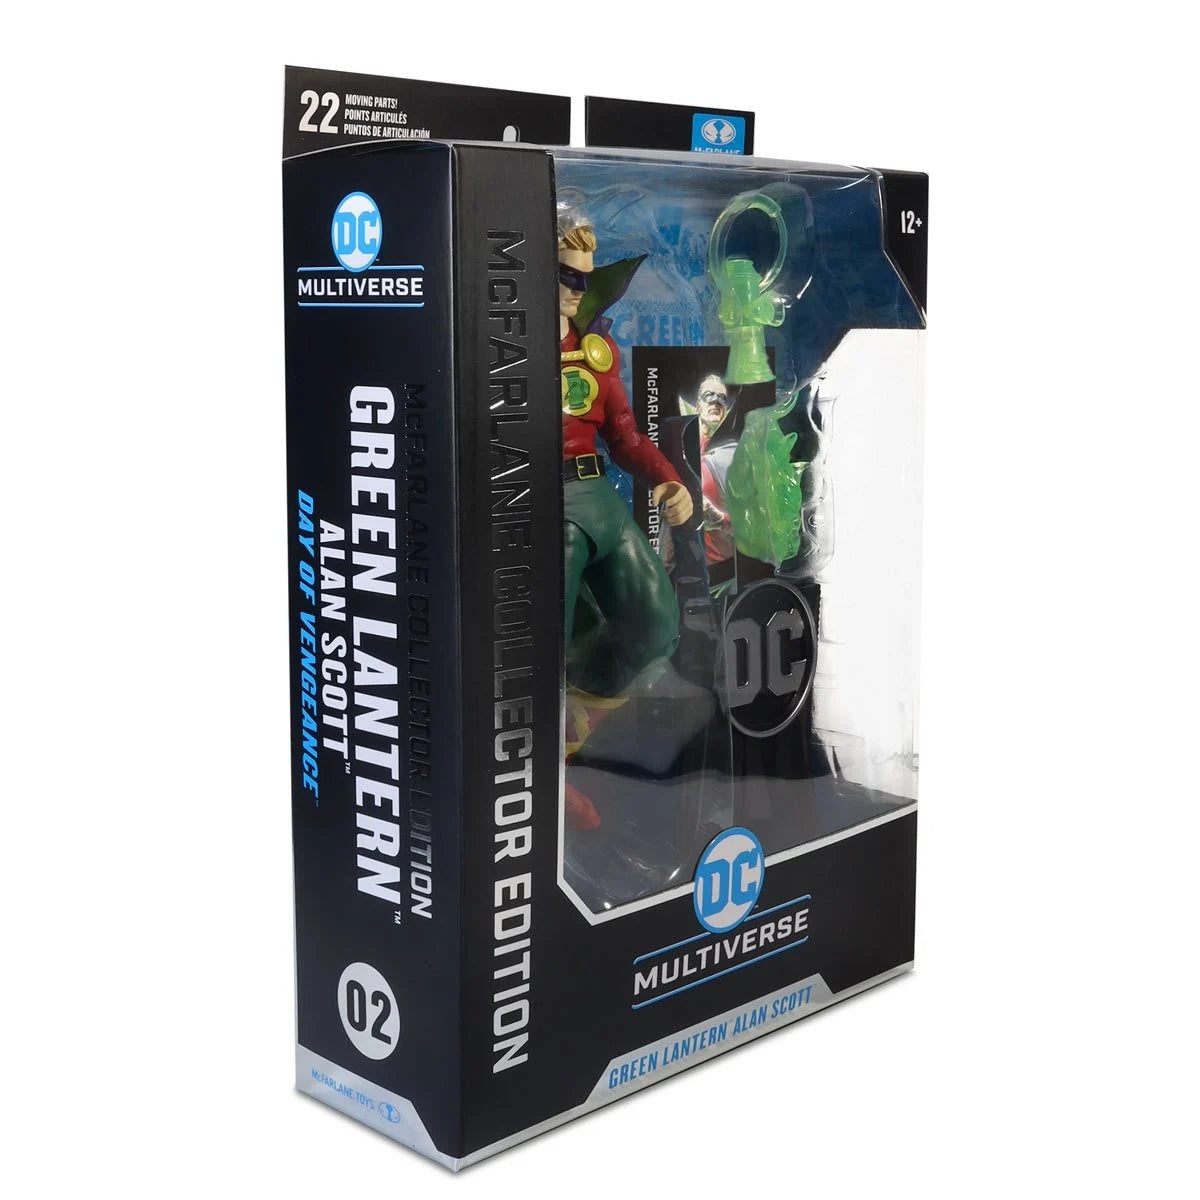 DC McFarlane Collector Edition Wave 1 Green Lantern Alan Scott Day of Vengeance 7-Inch Scale Action Figure